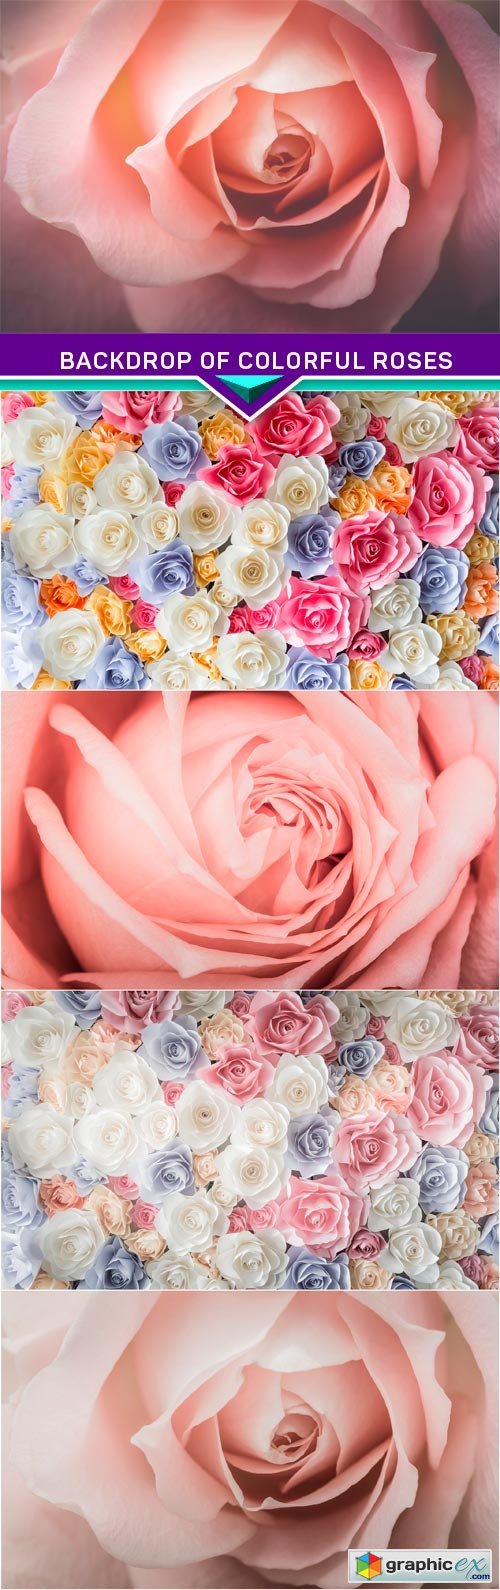 Backdrop of colorful roses 5x JPEG